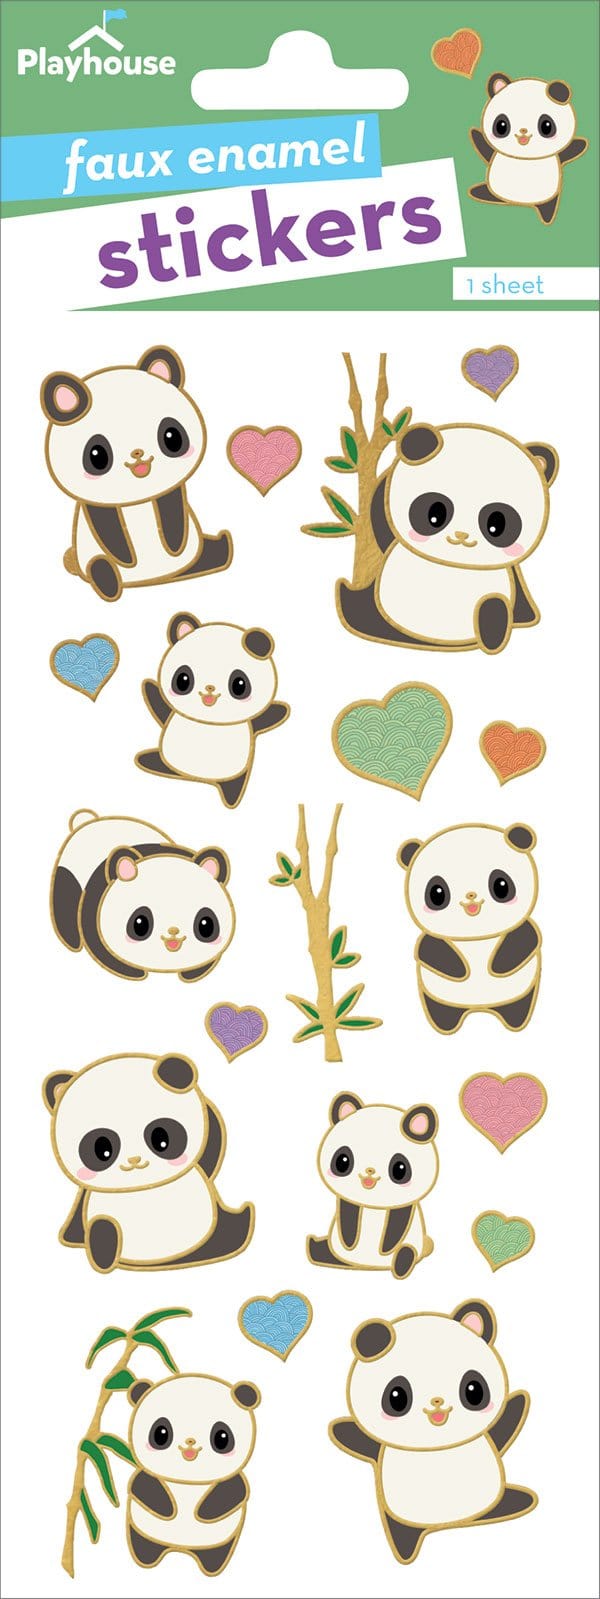 foil stickers featuring illustrated panda bears, bamboo and hearts with gold details, shown in package.